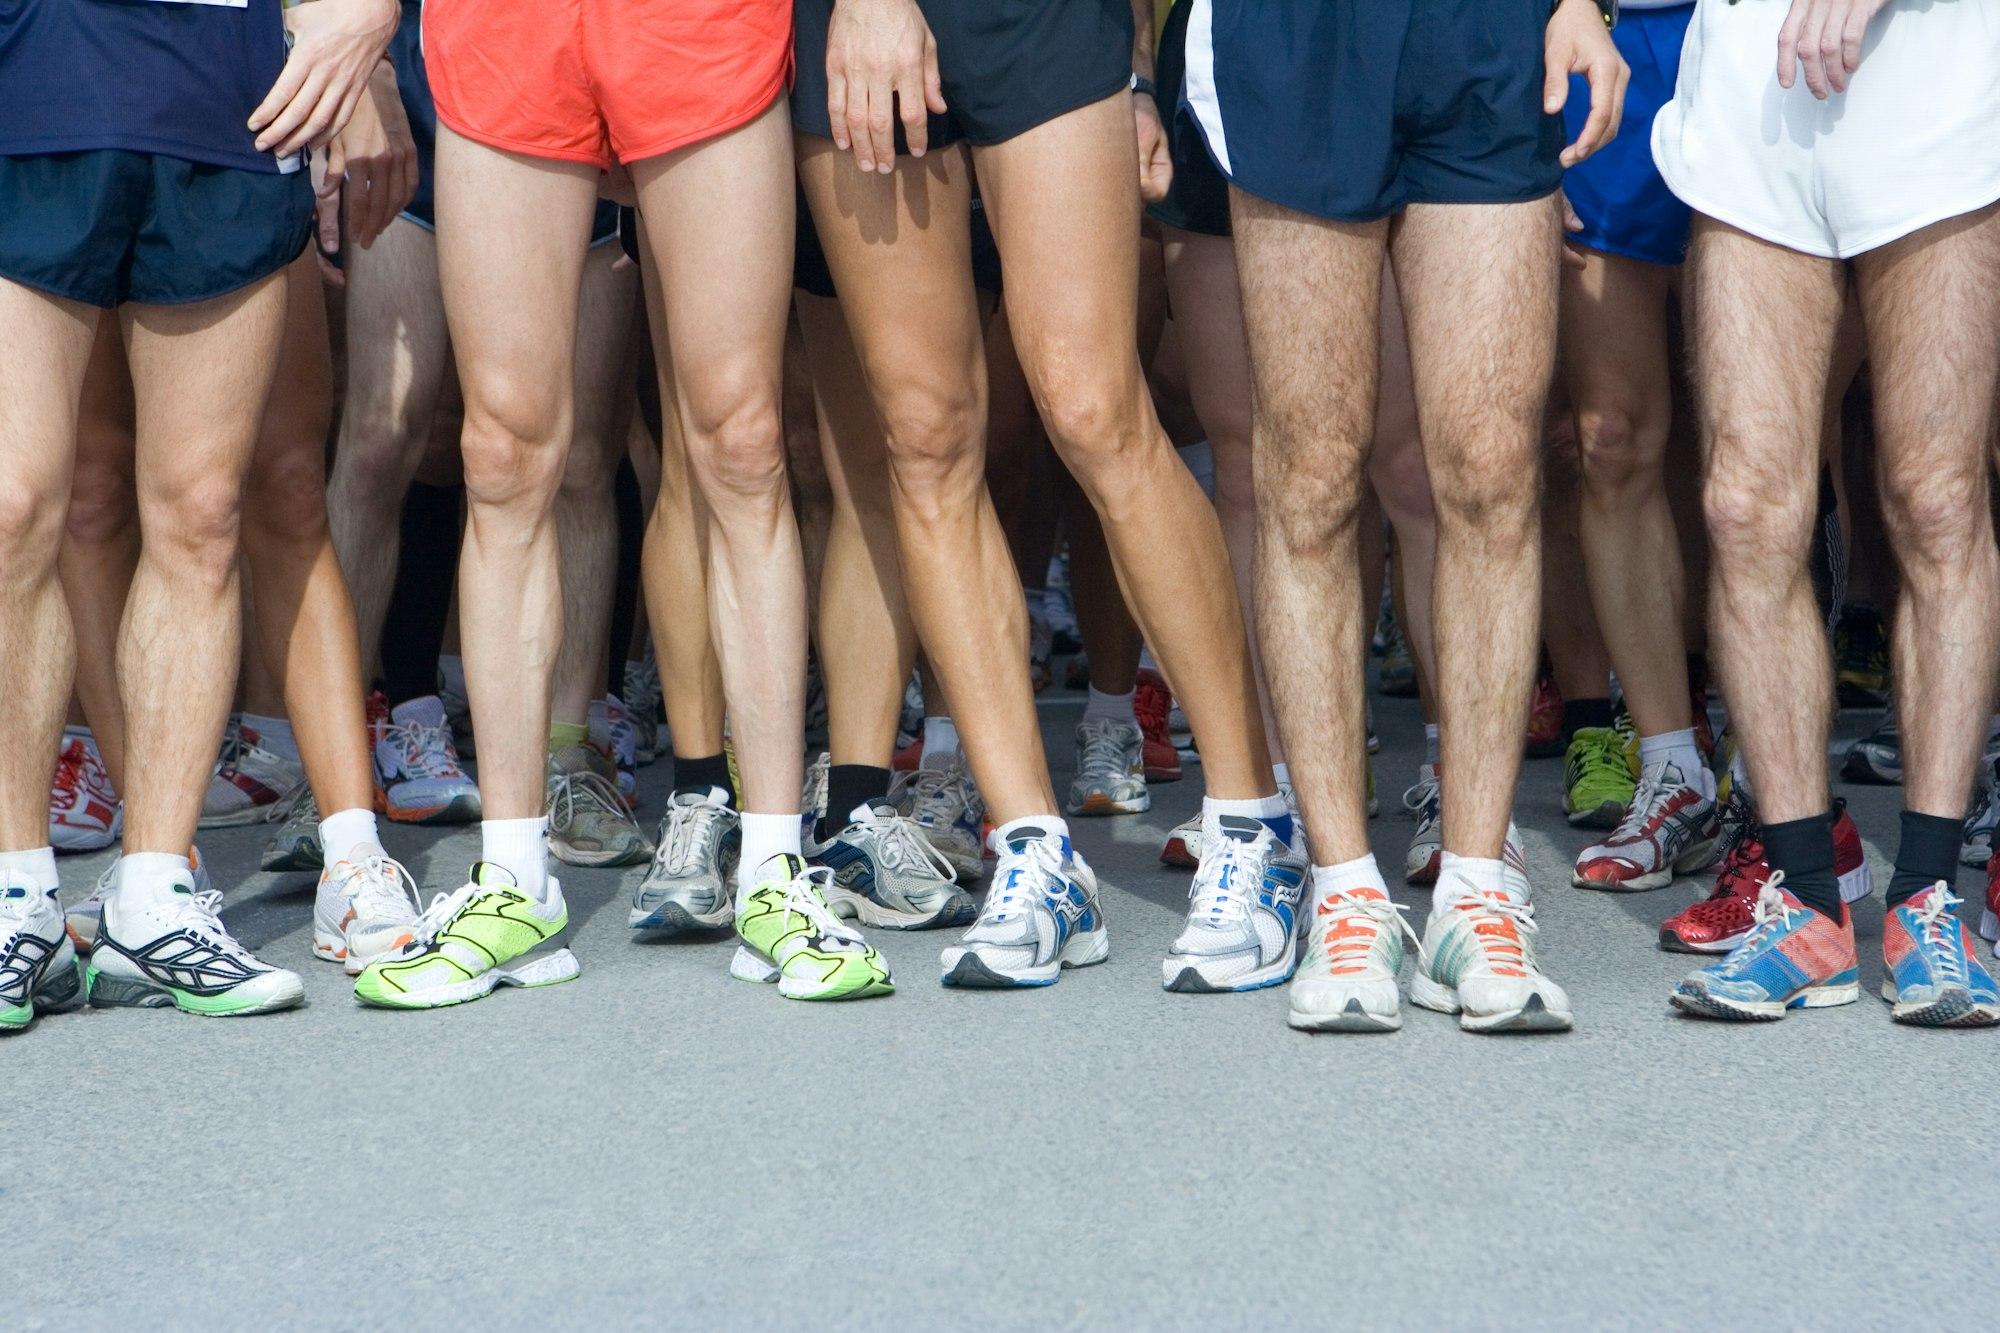 A waist-down photo of a group of runners with bare legs and various running shoes, getting ready to start a race.